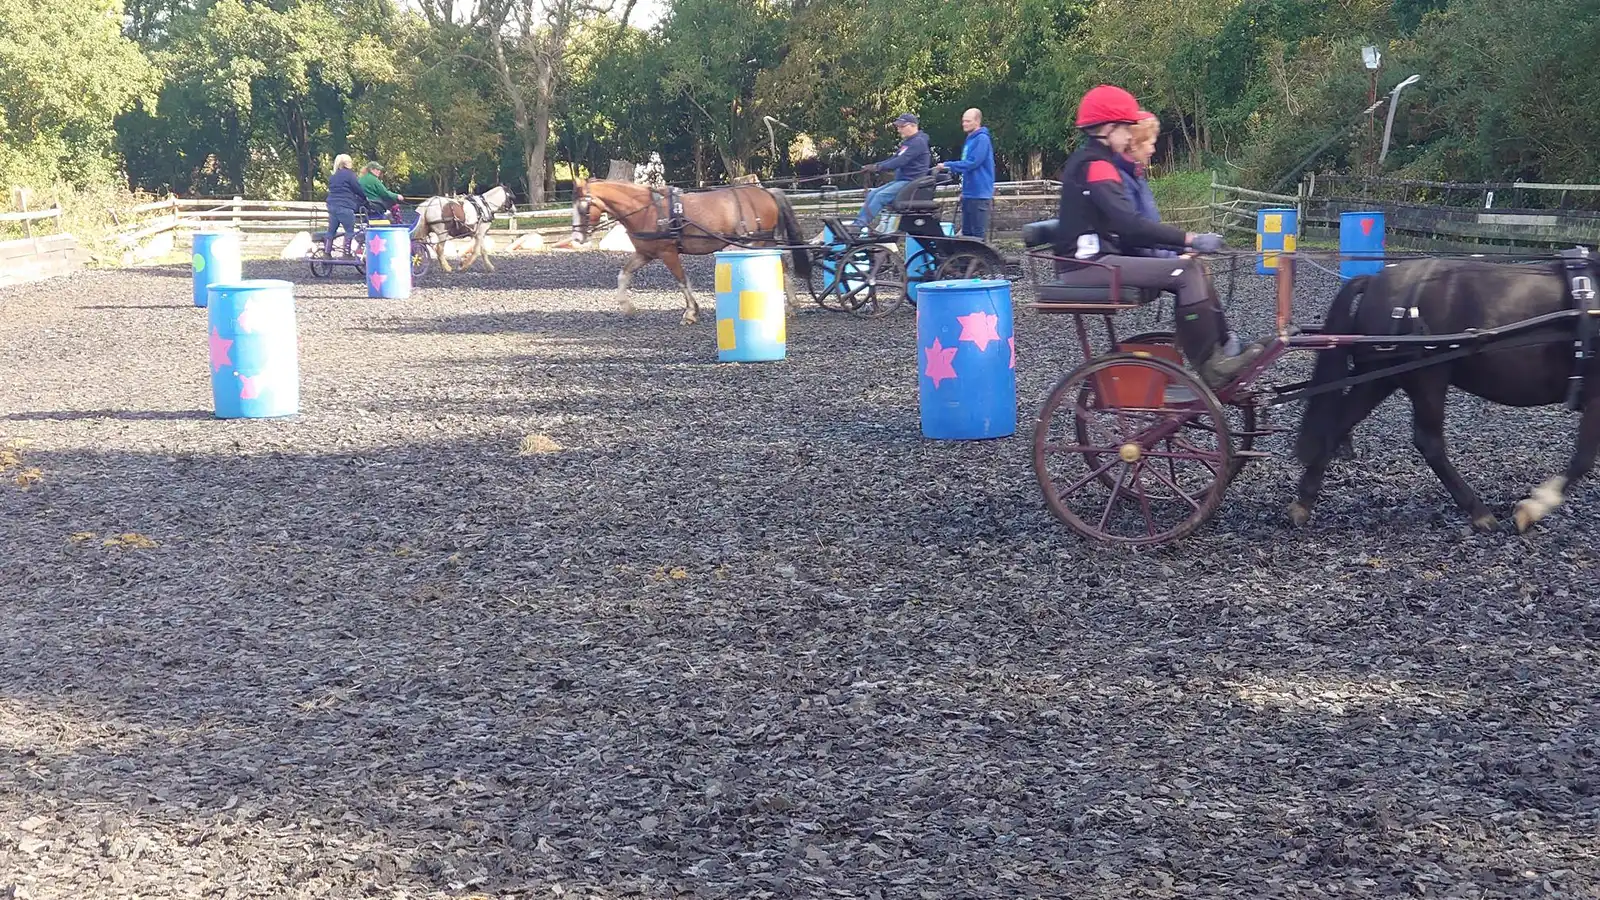 Beginners carriage driving lessons in the school